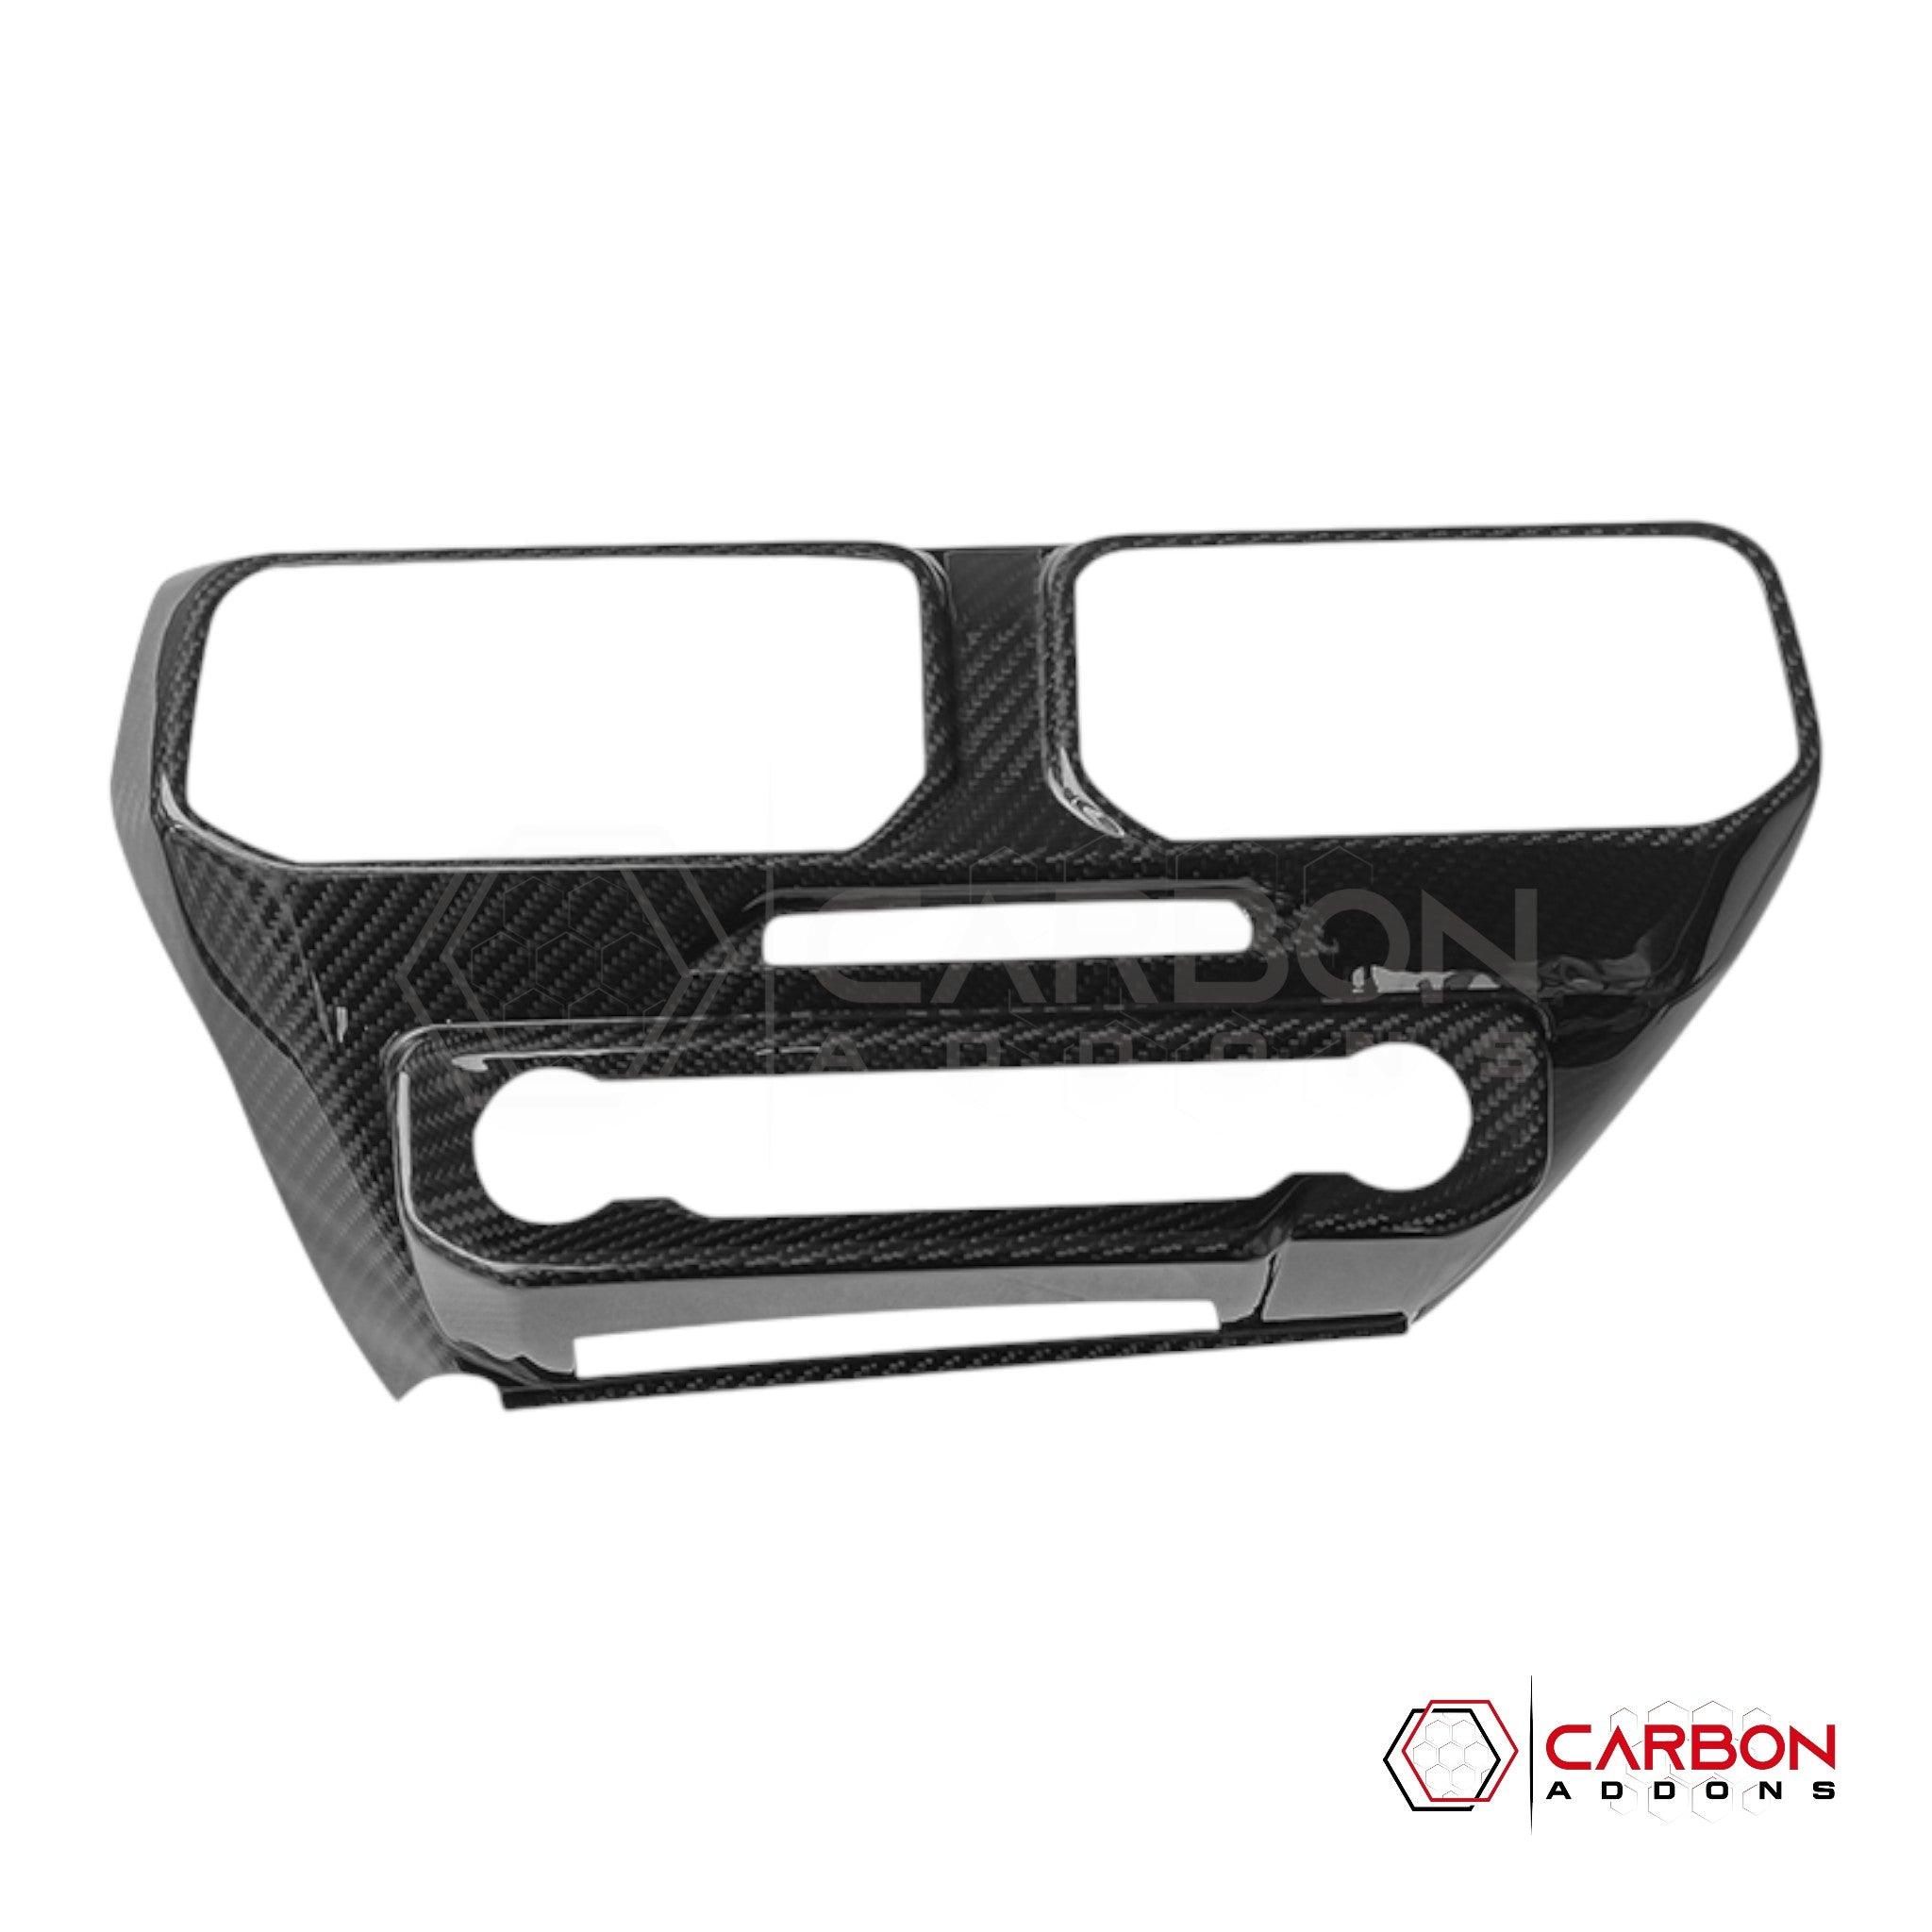 [Coming Soon] 2024-Up S650 Ford Mustang Hard Carbon Fiber Dashboard Center AC Vent Trim Cover - carbonaddons Carbon Fiber Parts, Accessories, Upgrades, Mods